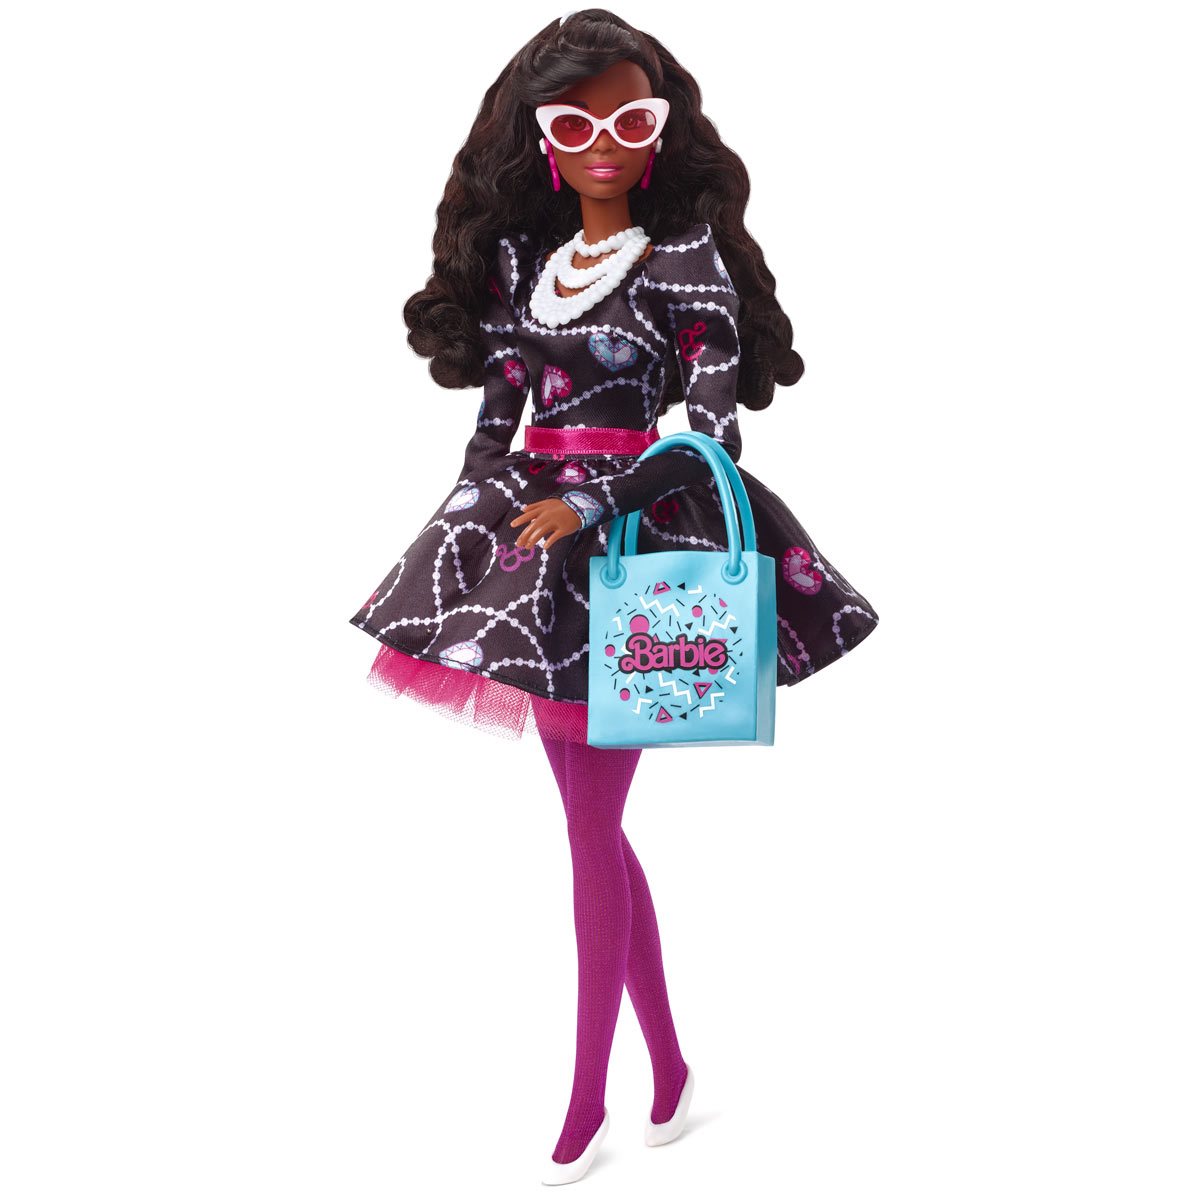 Barbie '80s Edition Style Doll